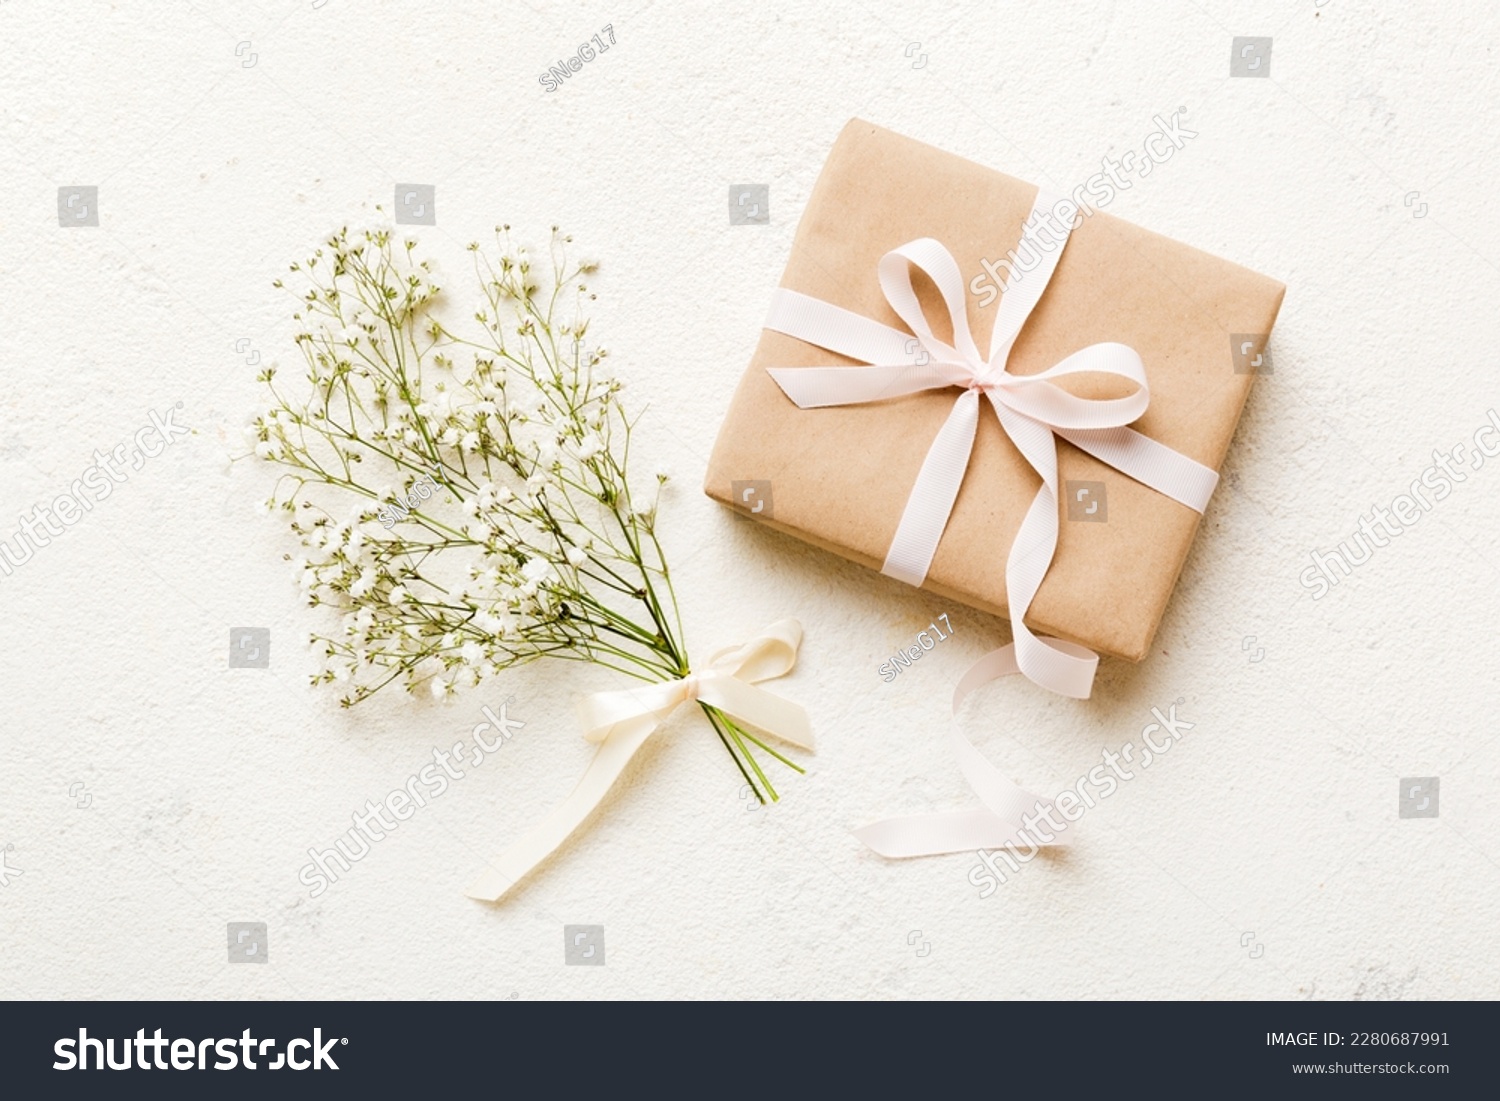 Gift or present box and flower gypsophila on light table top view. Greeting card. Flat lay style with copy space. #2280687991